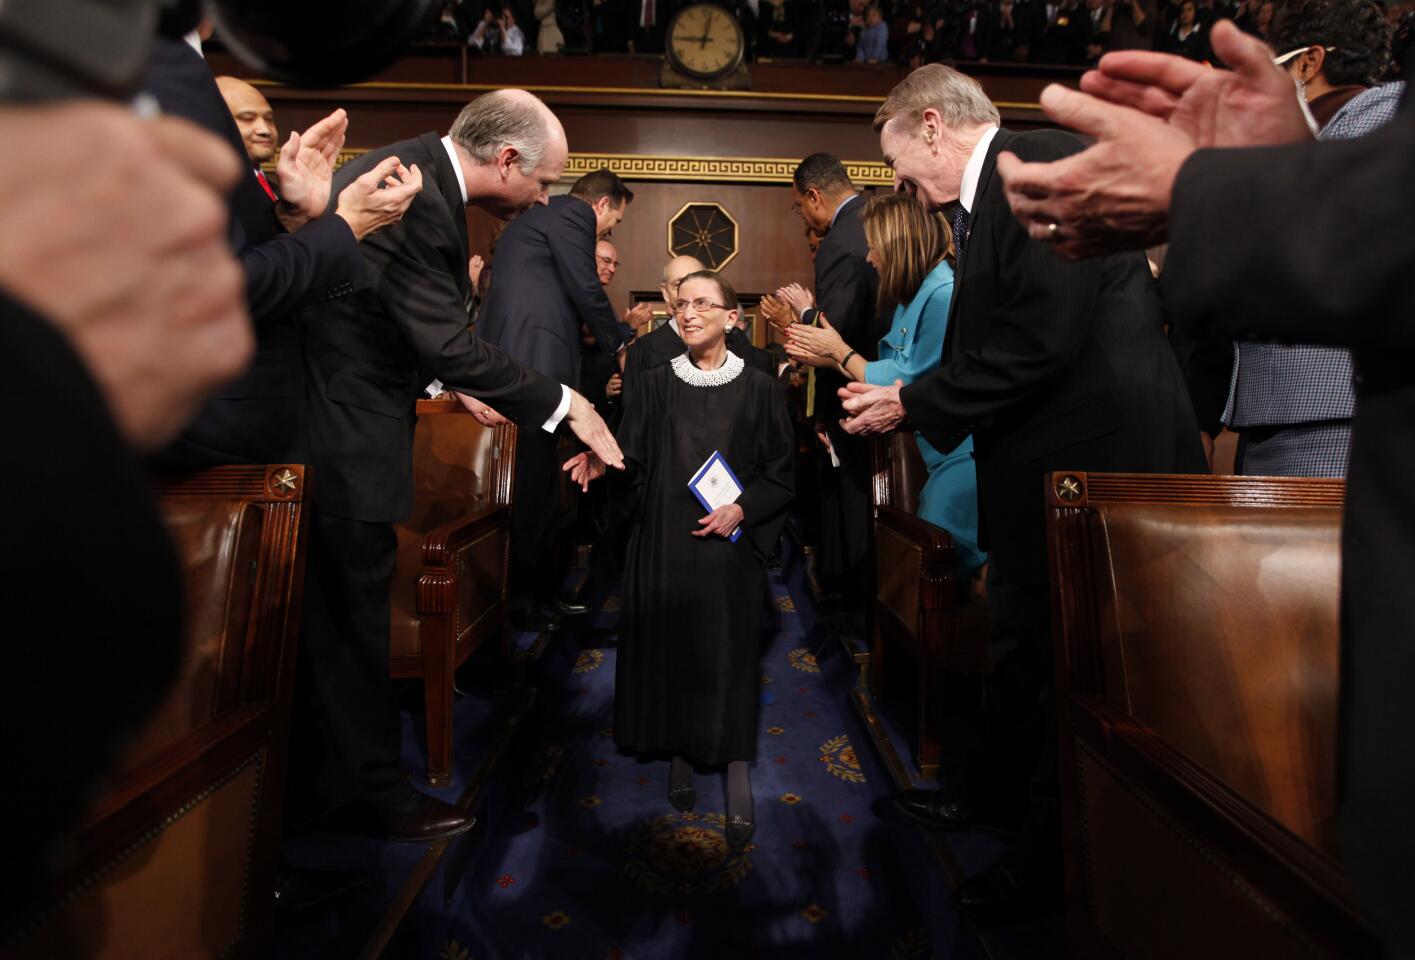 Ruth Bader Ginsburg walks down the aisle in the U.S. House chamber shaking hands with lawmakers